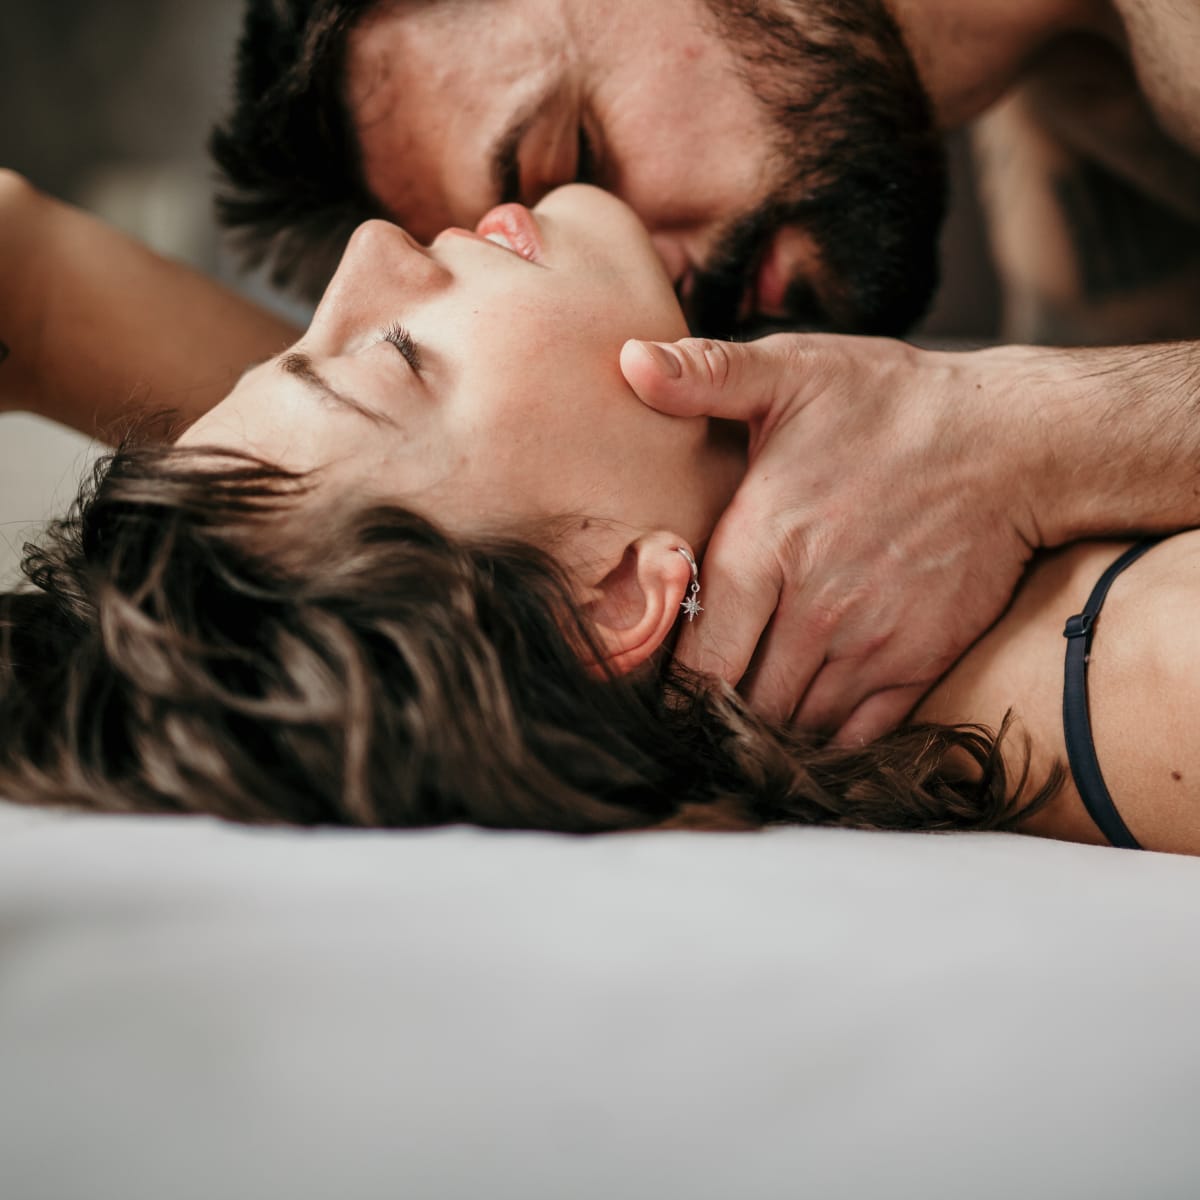 15 Missionary Sex Positions That Are Anything but Boring - Men's Journal